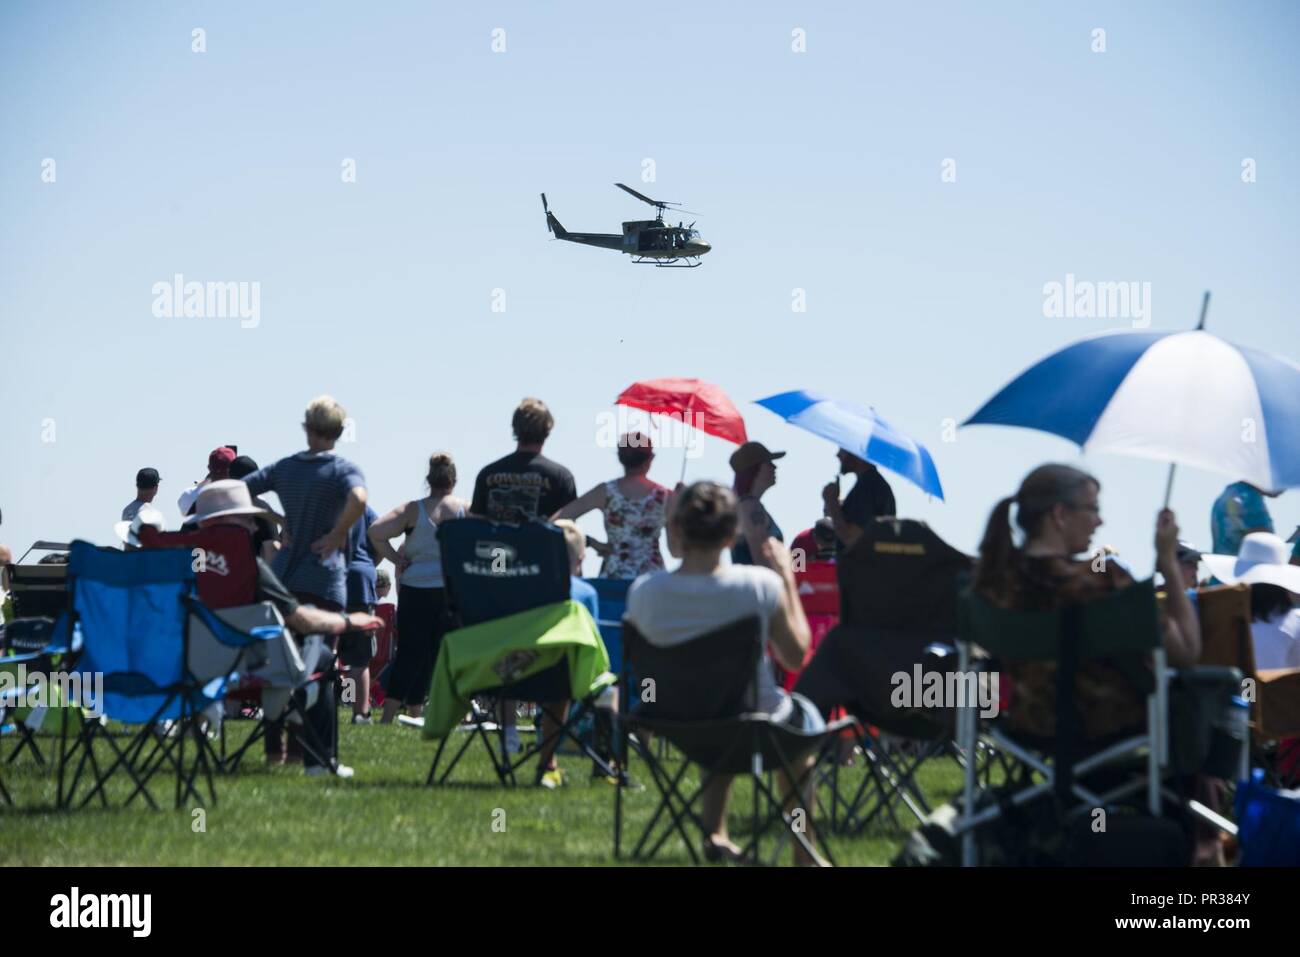 A UH-1N Huey performs during the Skyfest 2017 Air Show and Open House at Fairchild Air Force Base, Washington, July 29, 2017. SkyFest was an opportunity to give the local and regional community a chance to view Airmen and our resources. Stock Photo